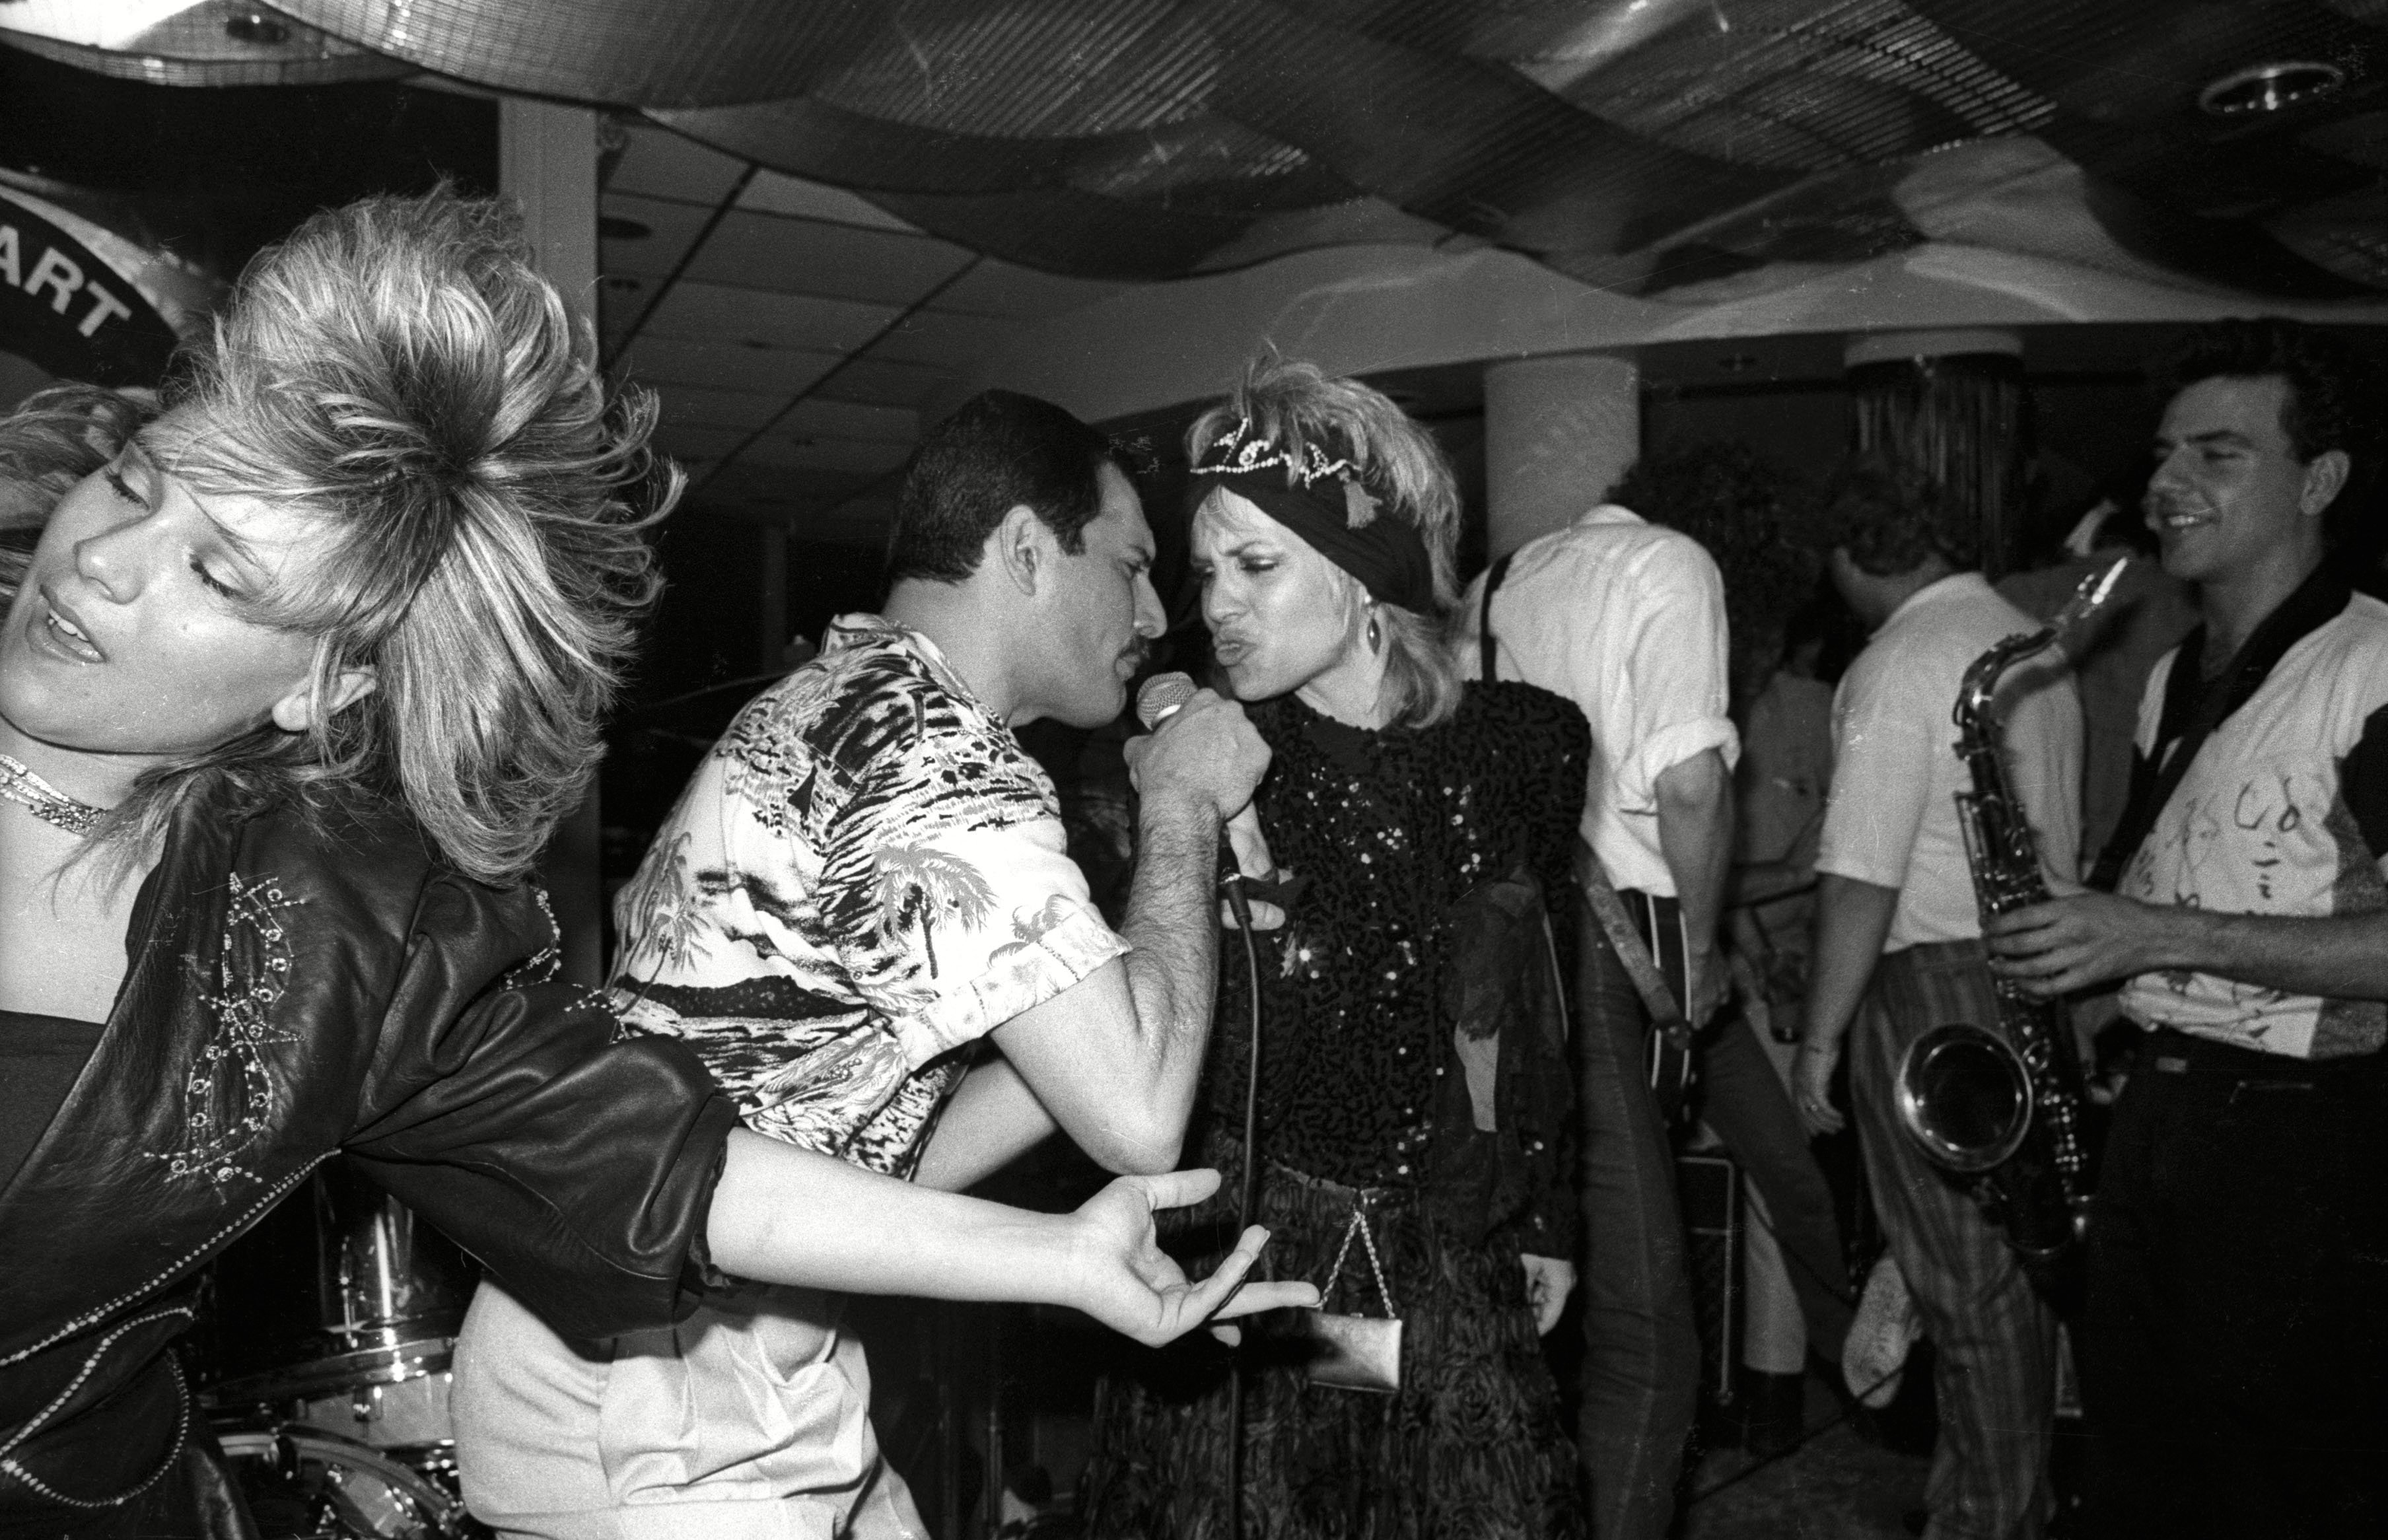 Queen Hold A Private Concert and Party and Were Billed As 'Dicky Heart and the Pacemakers' at the Kensington Roof Gardens - 11 Jul 1986